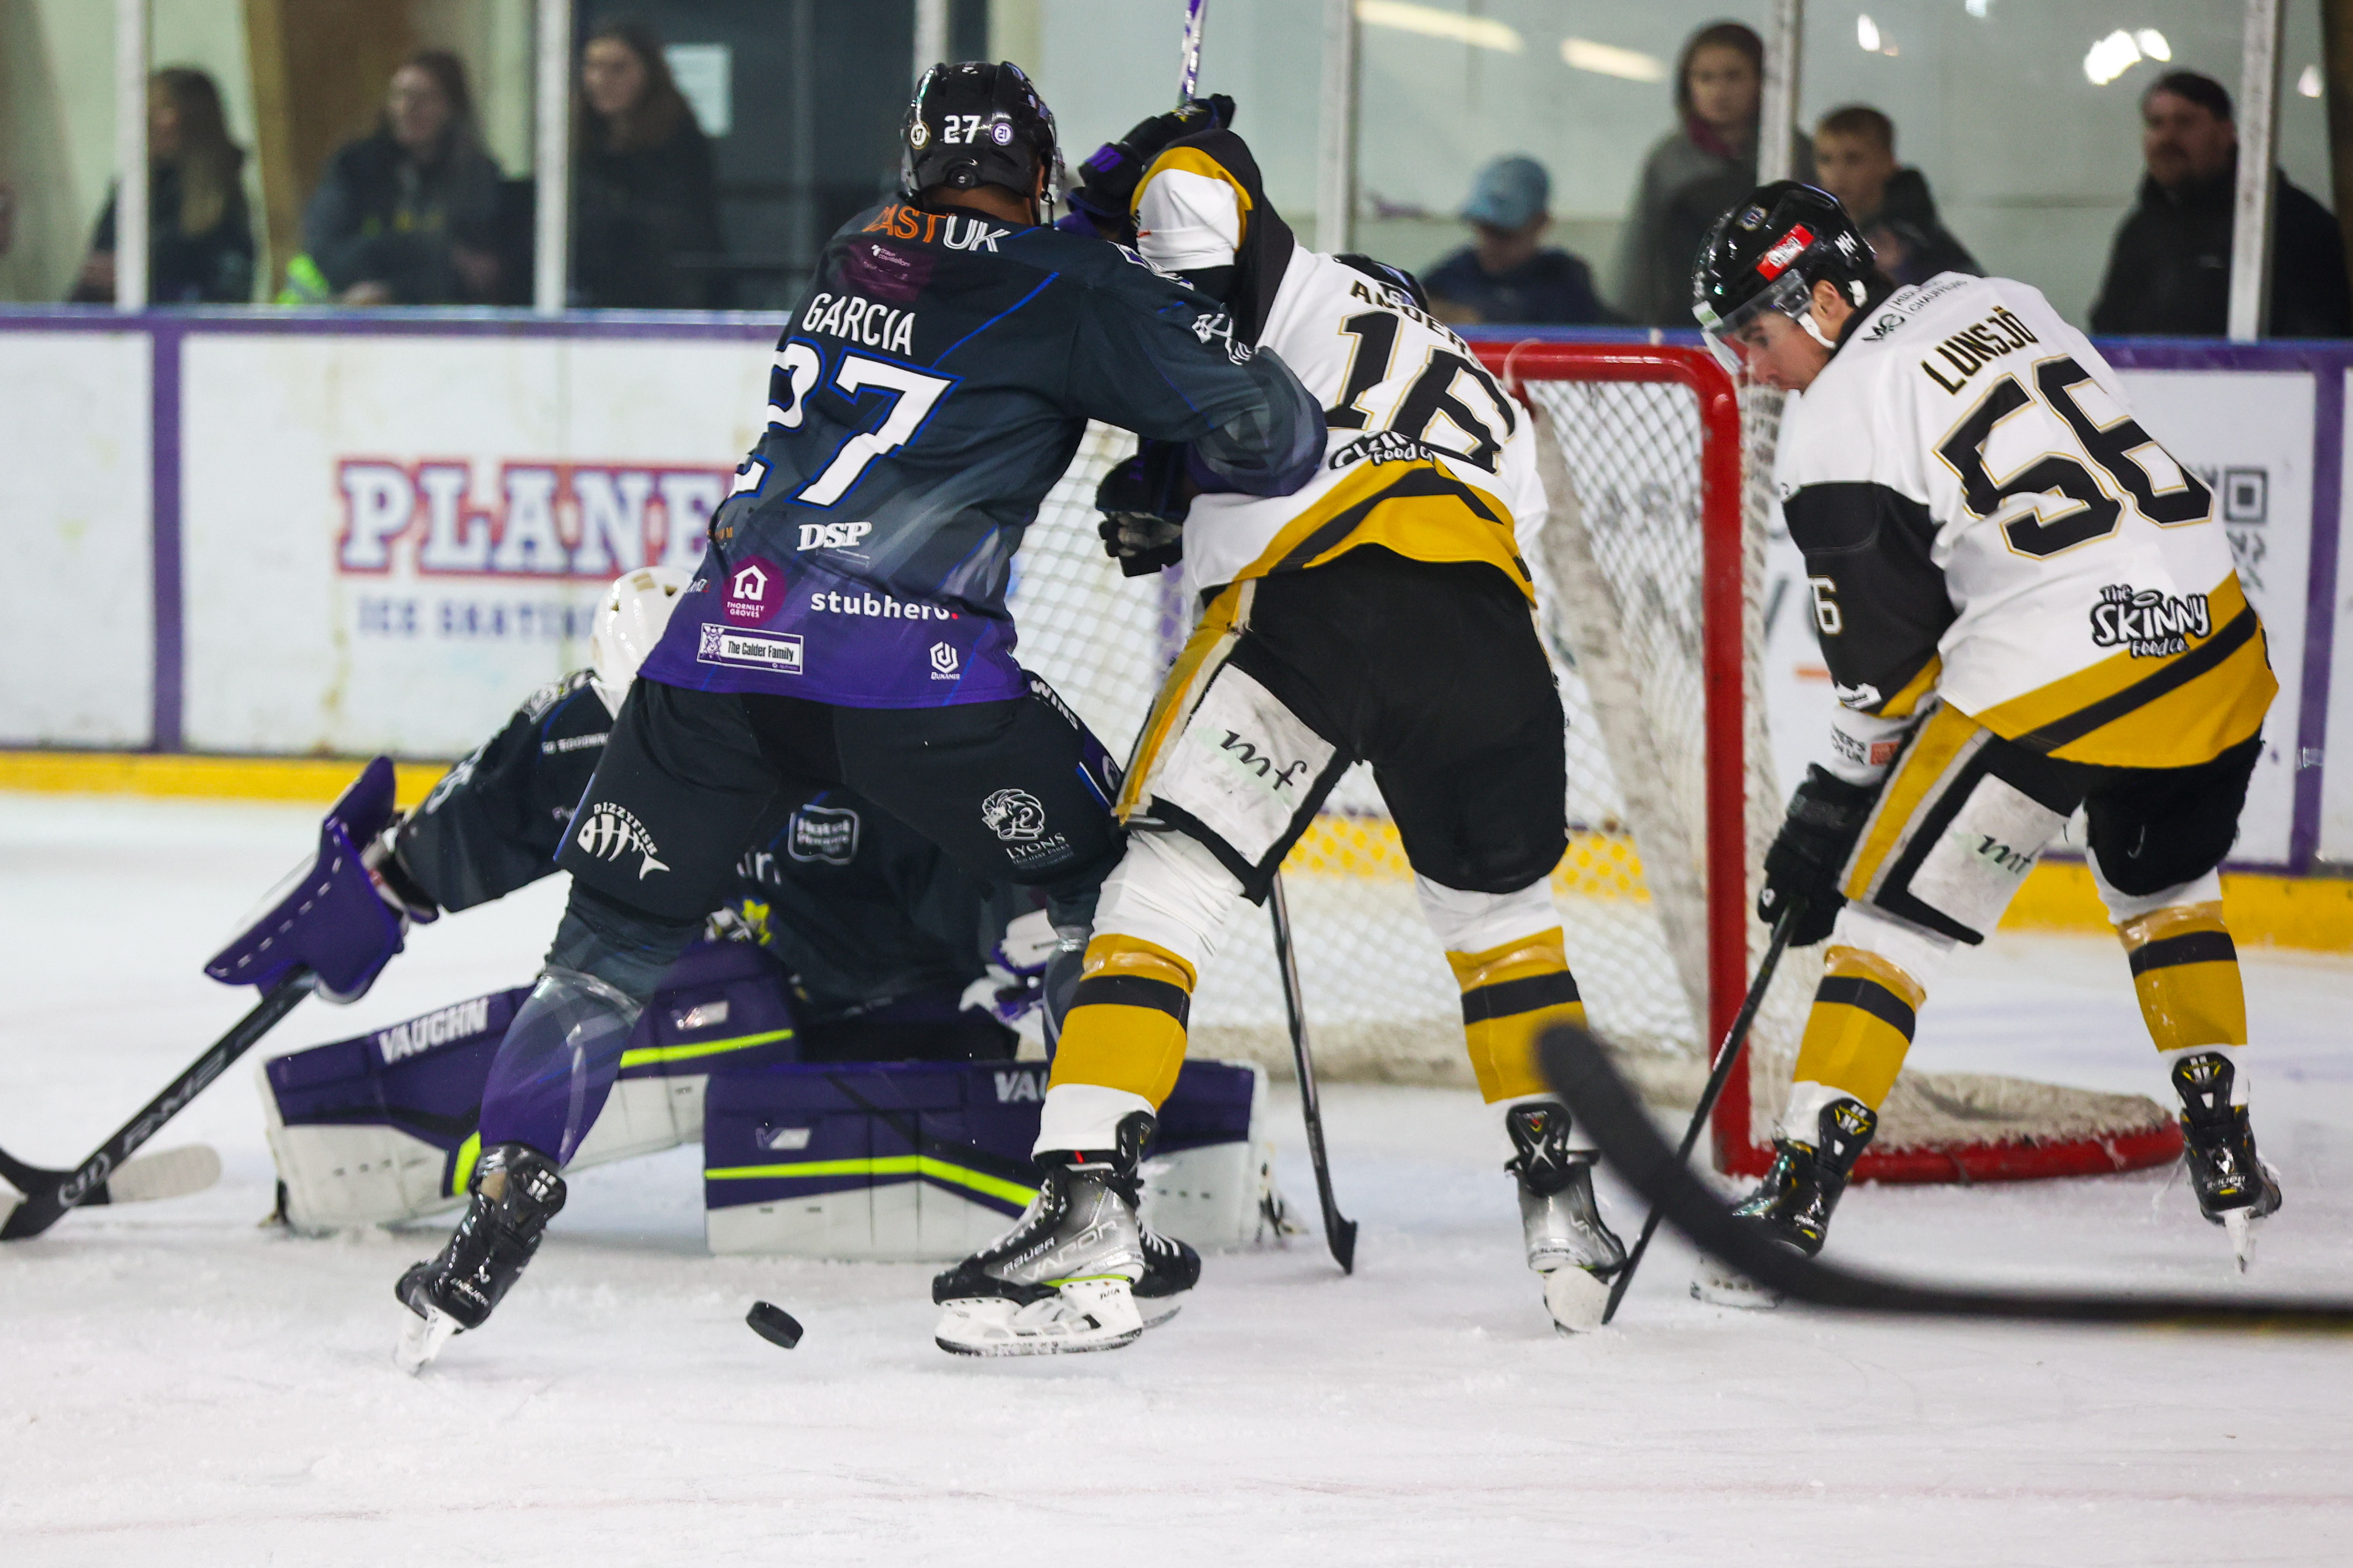 28TH JANUARY 2024: STORM 3-0 PANTHERS Top Image